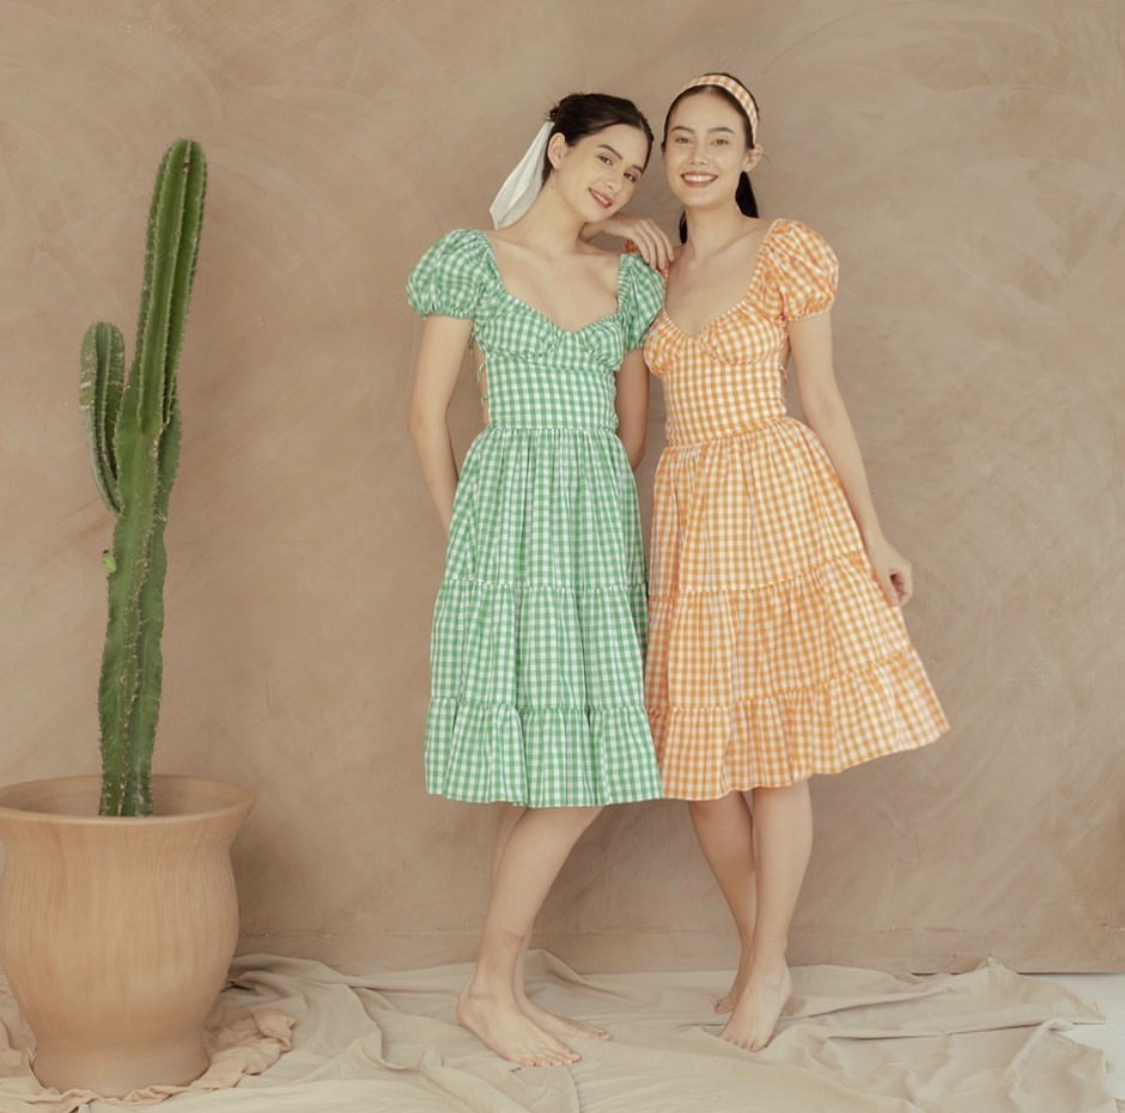 shops where you can buy dainty gingham clothing